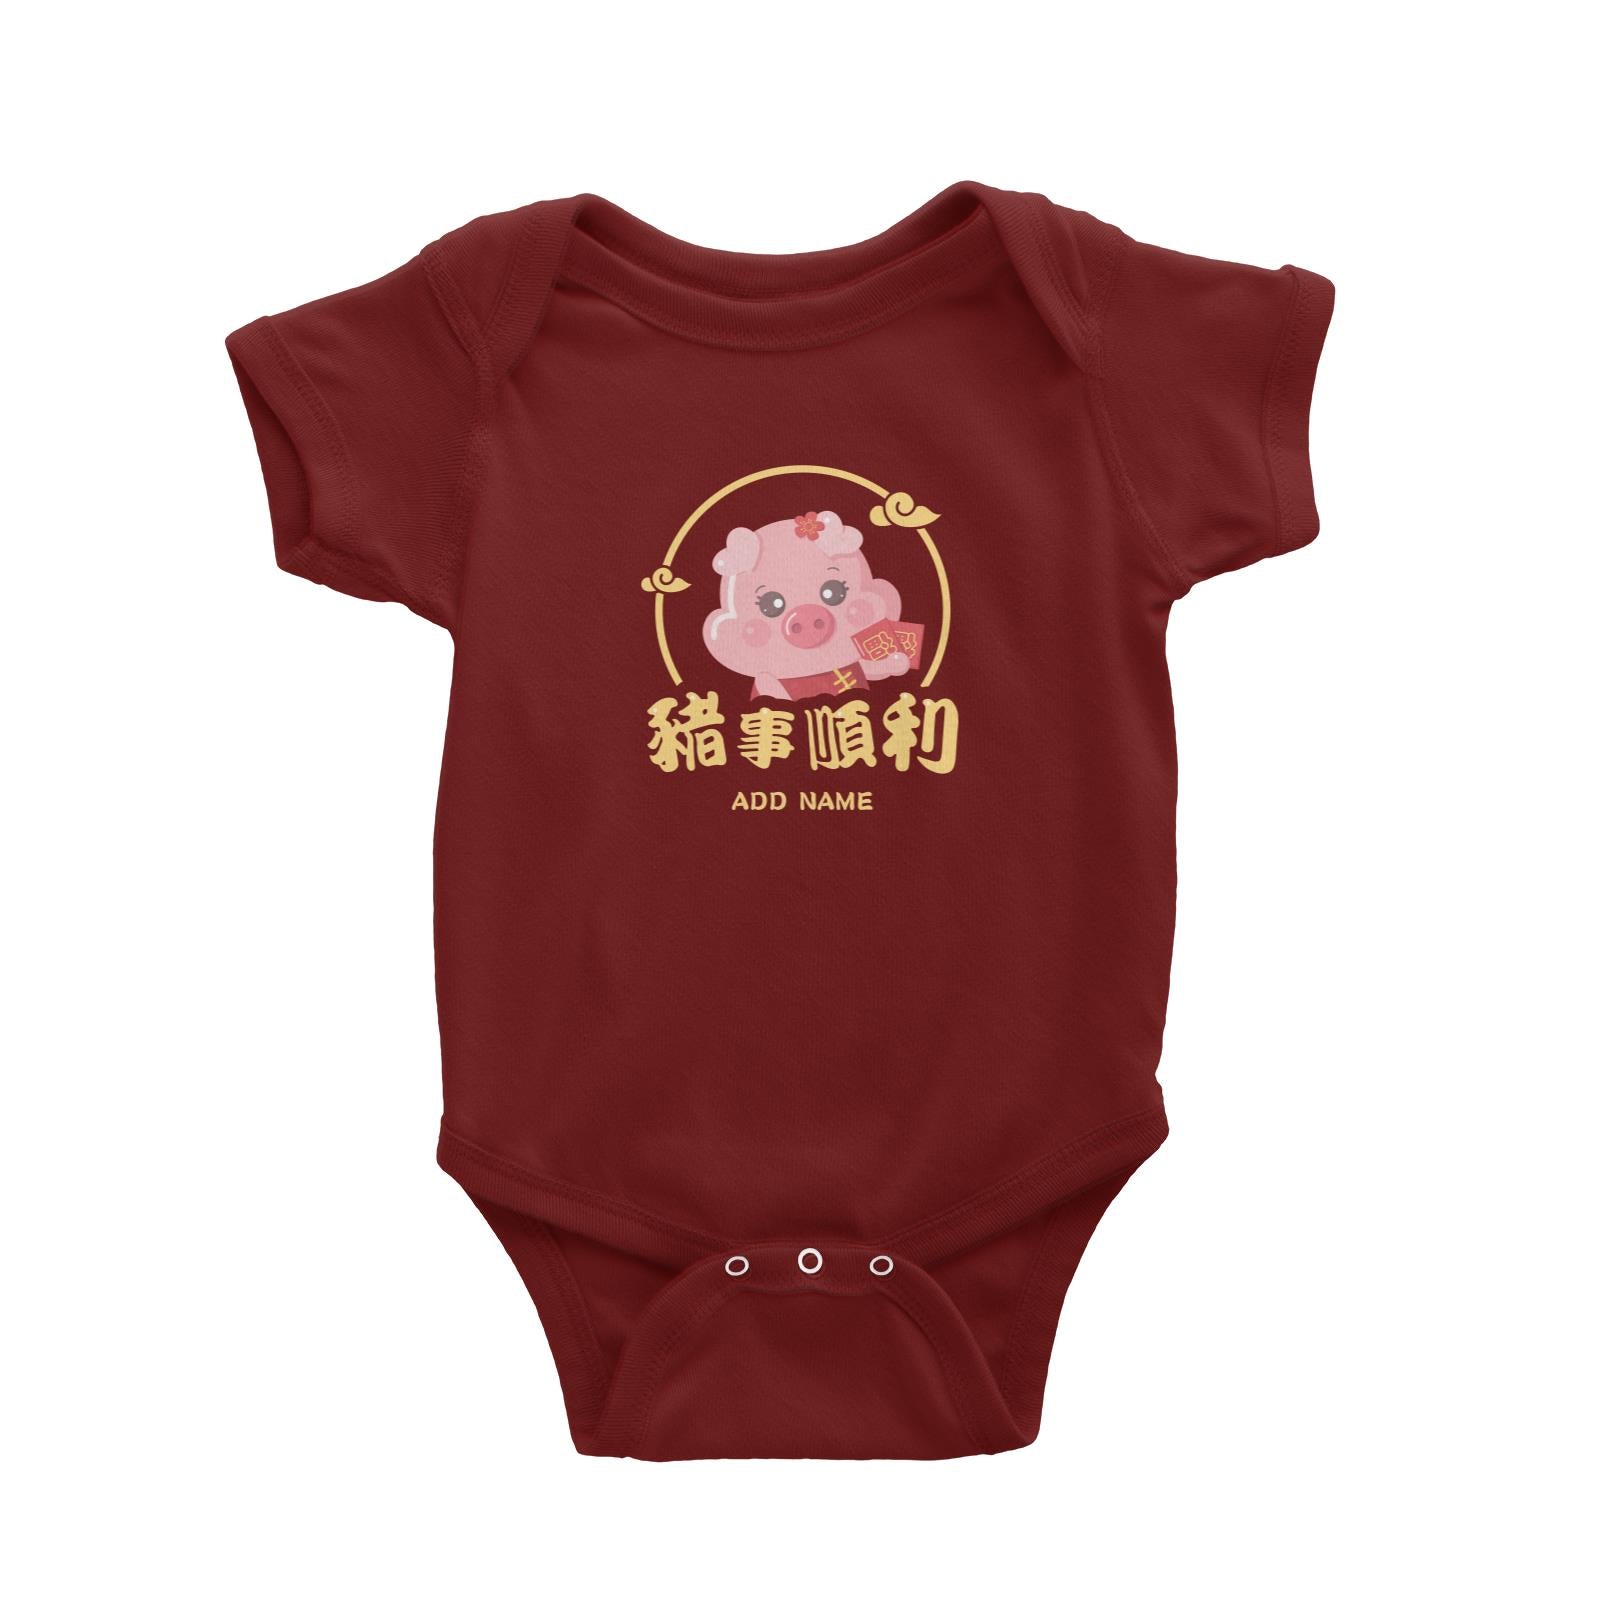 Chinese New Year Cute Pig Emblem Girl With Addname Baby Romper